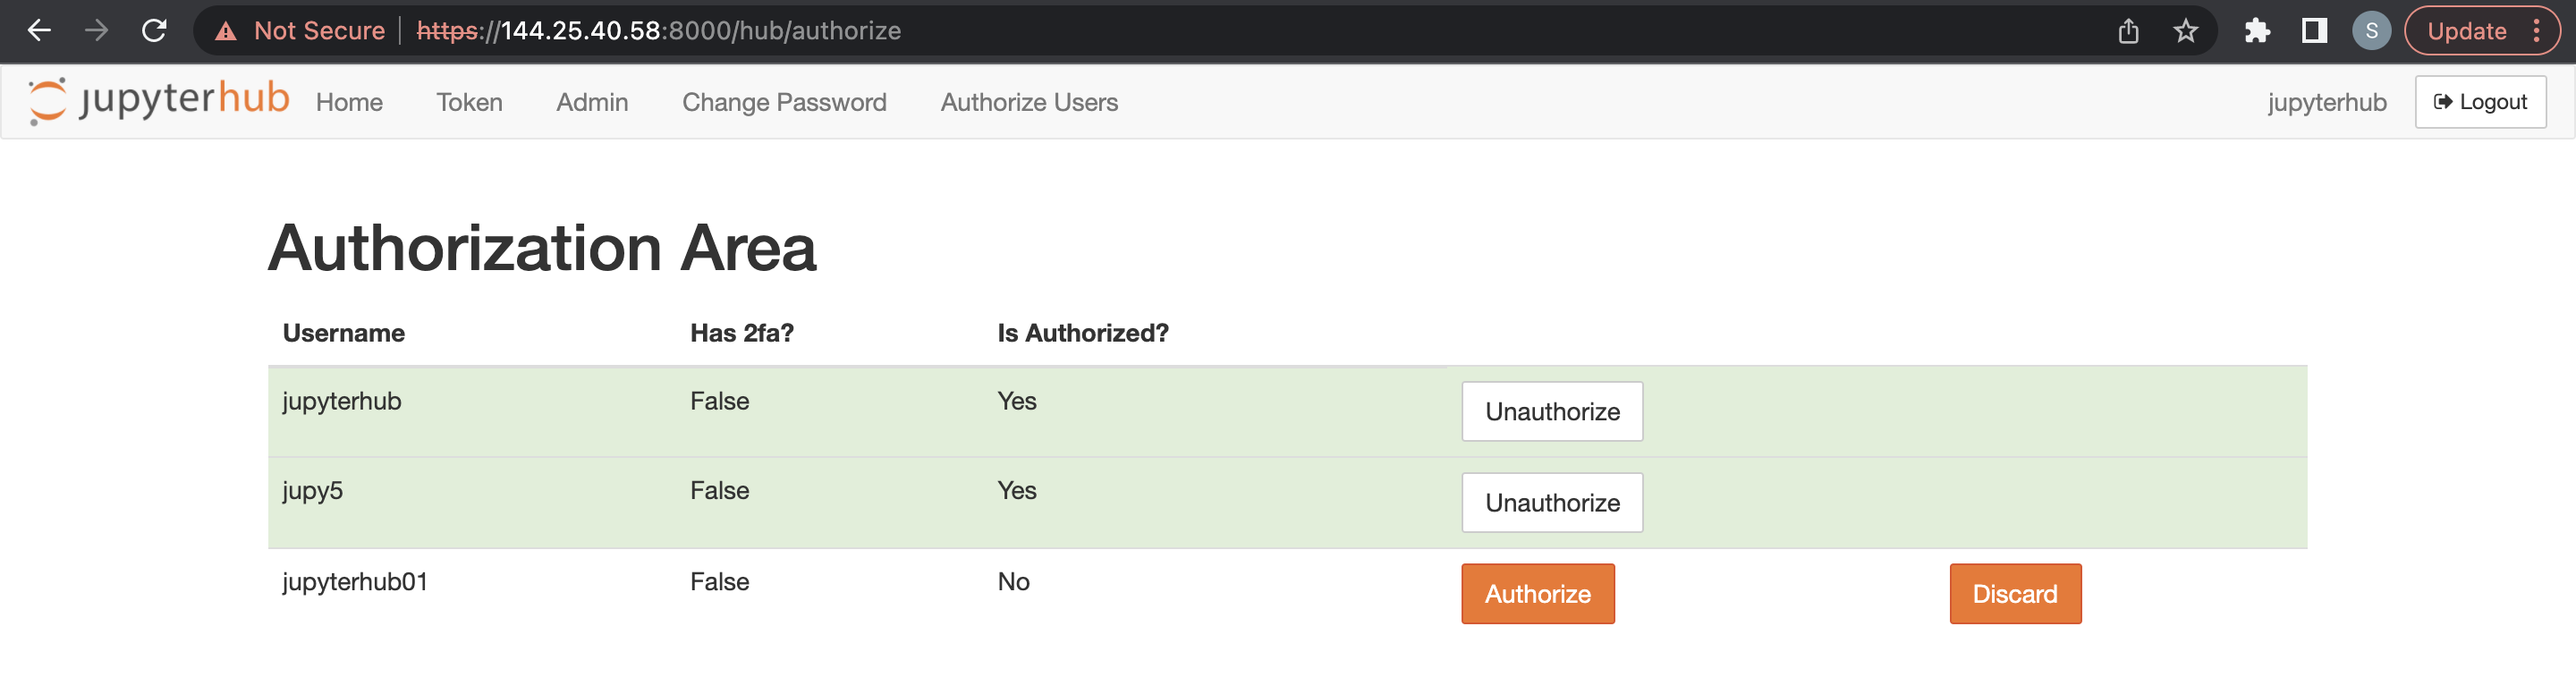 Screenshot of the Authorize Users page in Jupyterhub